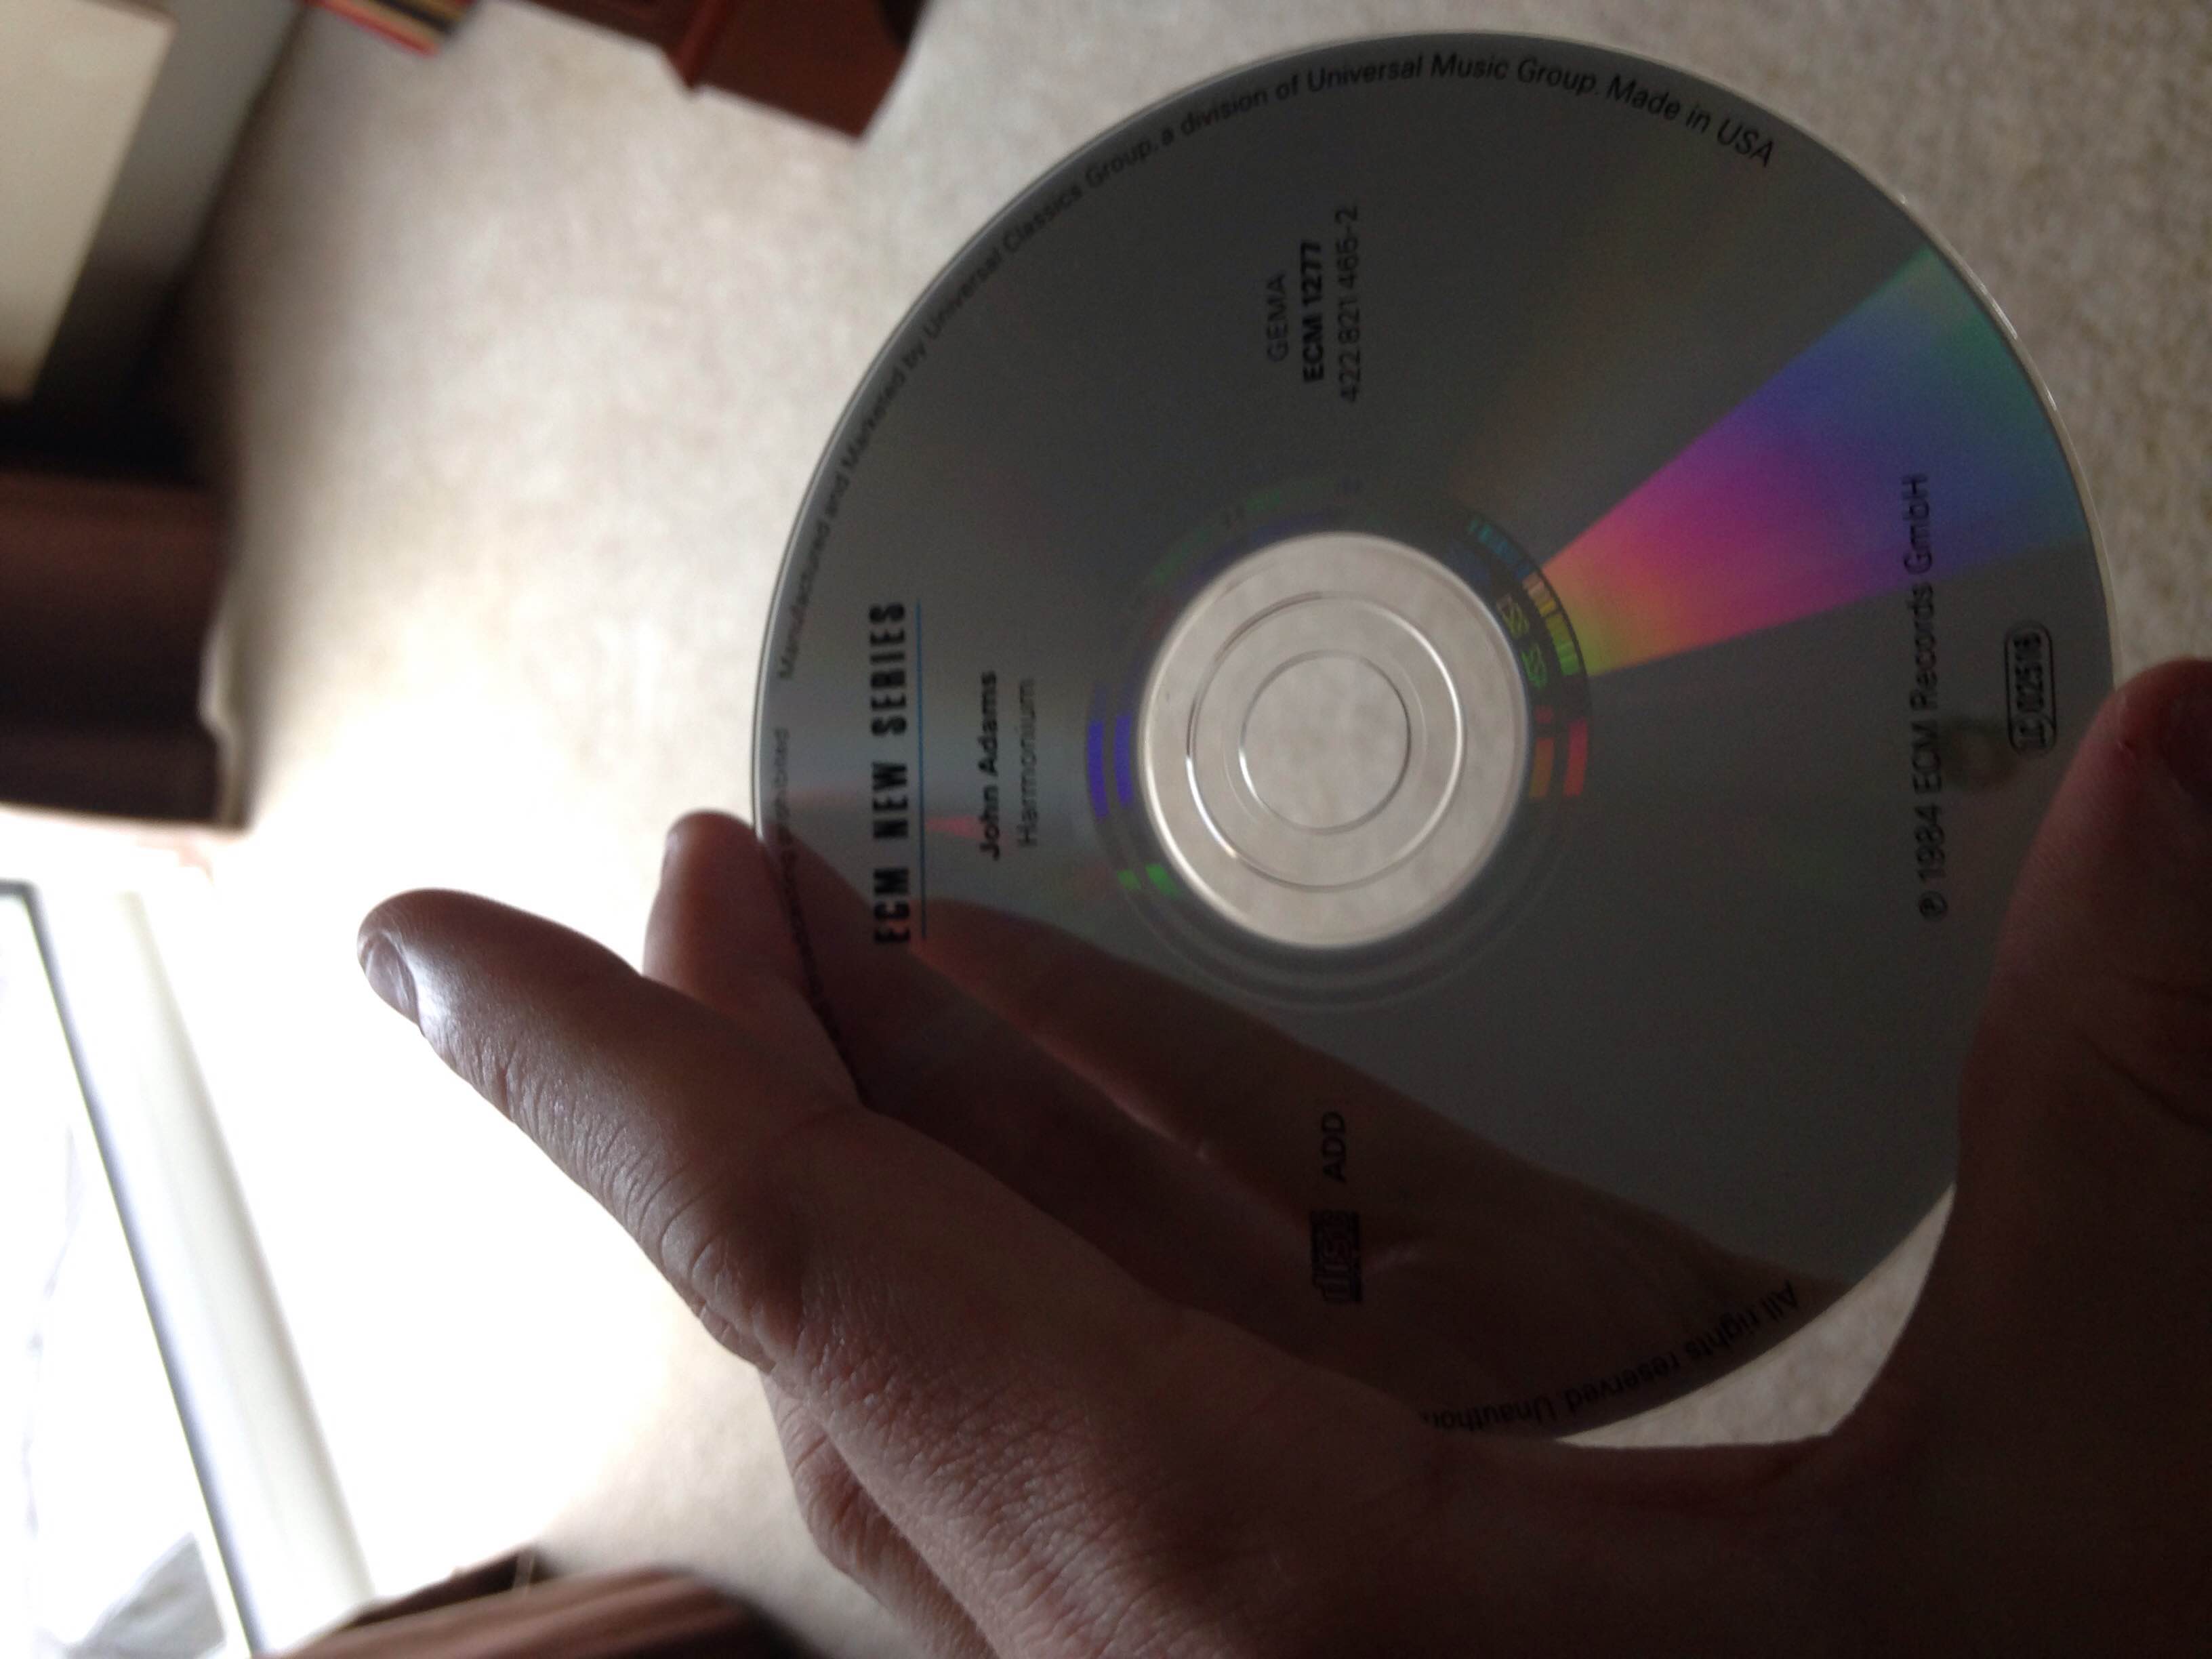 A CD being held up to the camera